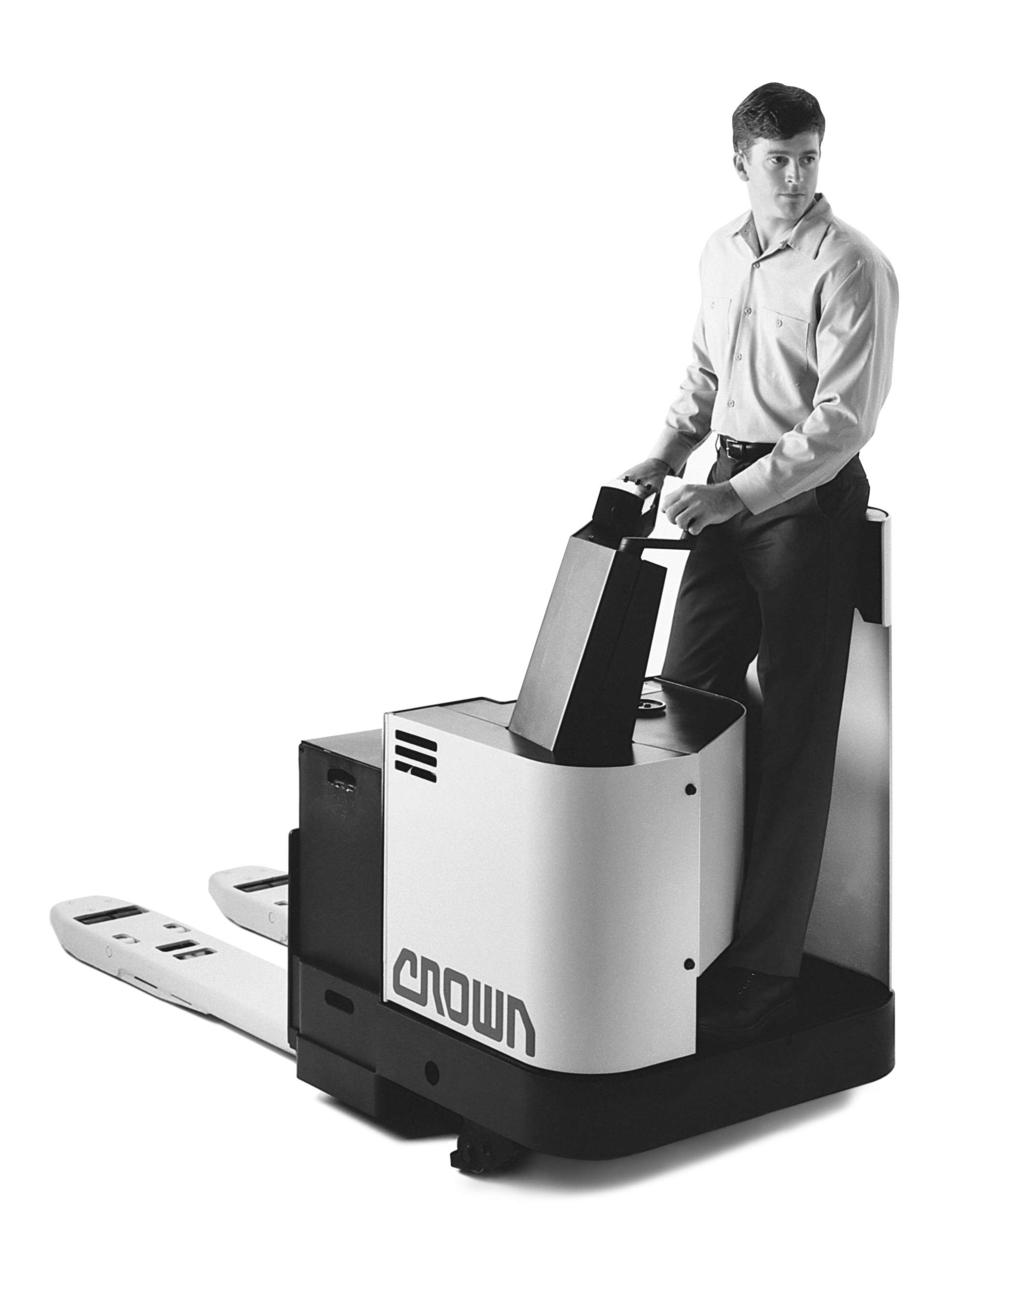 Your Rider Pallet Truck RIDER PALLET TRUCKS Your rider pallet truck is designed to move loads over long distances.